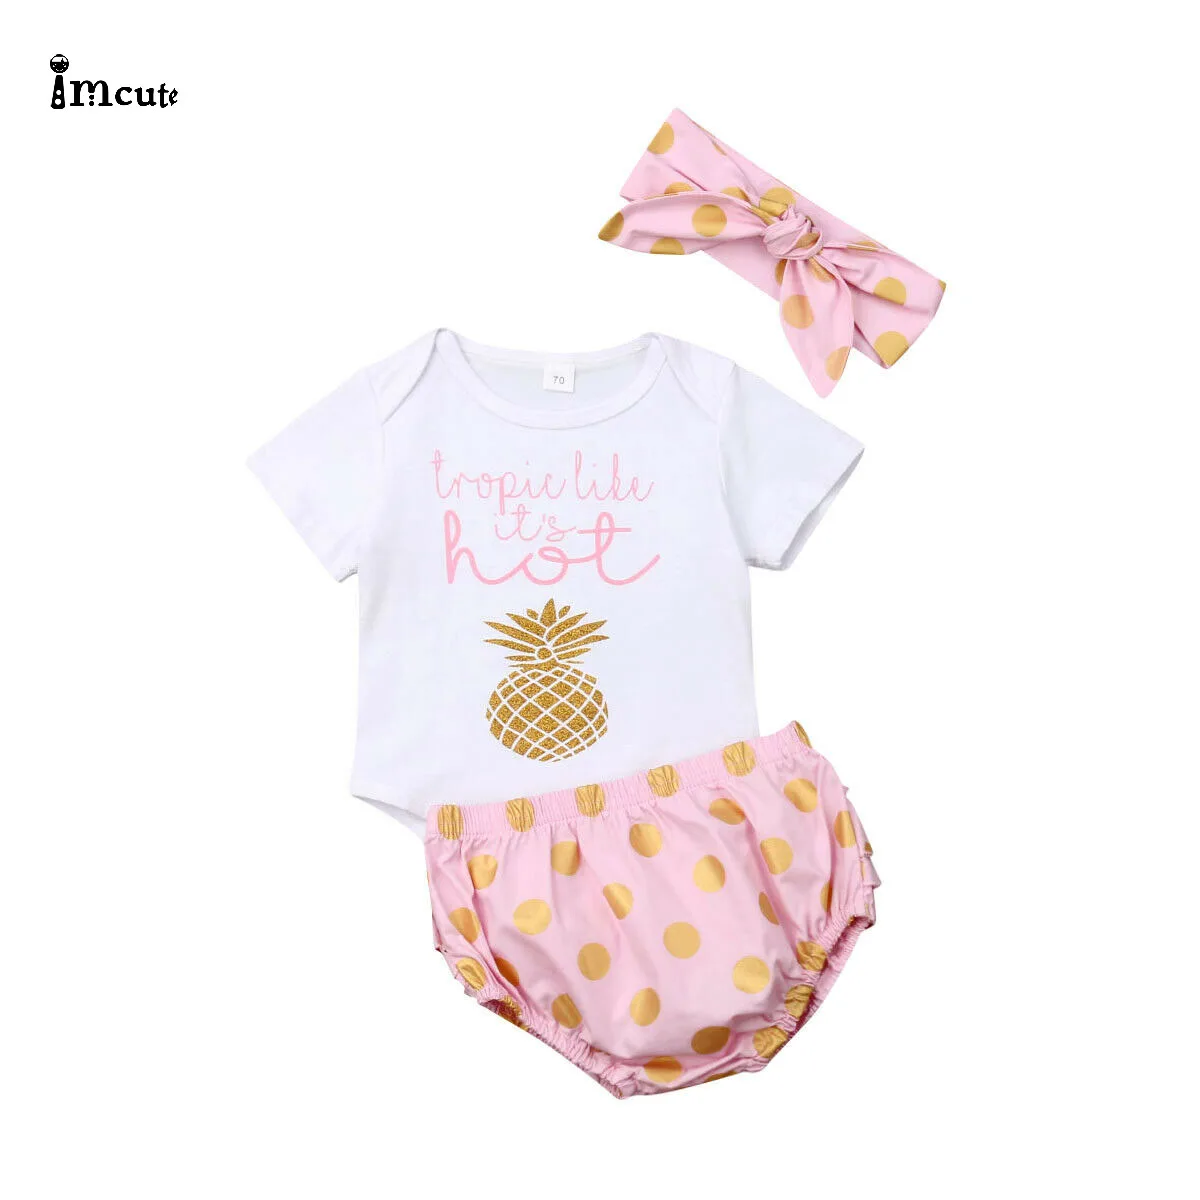 

UK Newborn Infant Toddler Baby Girl Clothes 2019 New Causal Cotton Pineapple Romper Ruffle Pink Briefs Outfits Set Summer